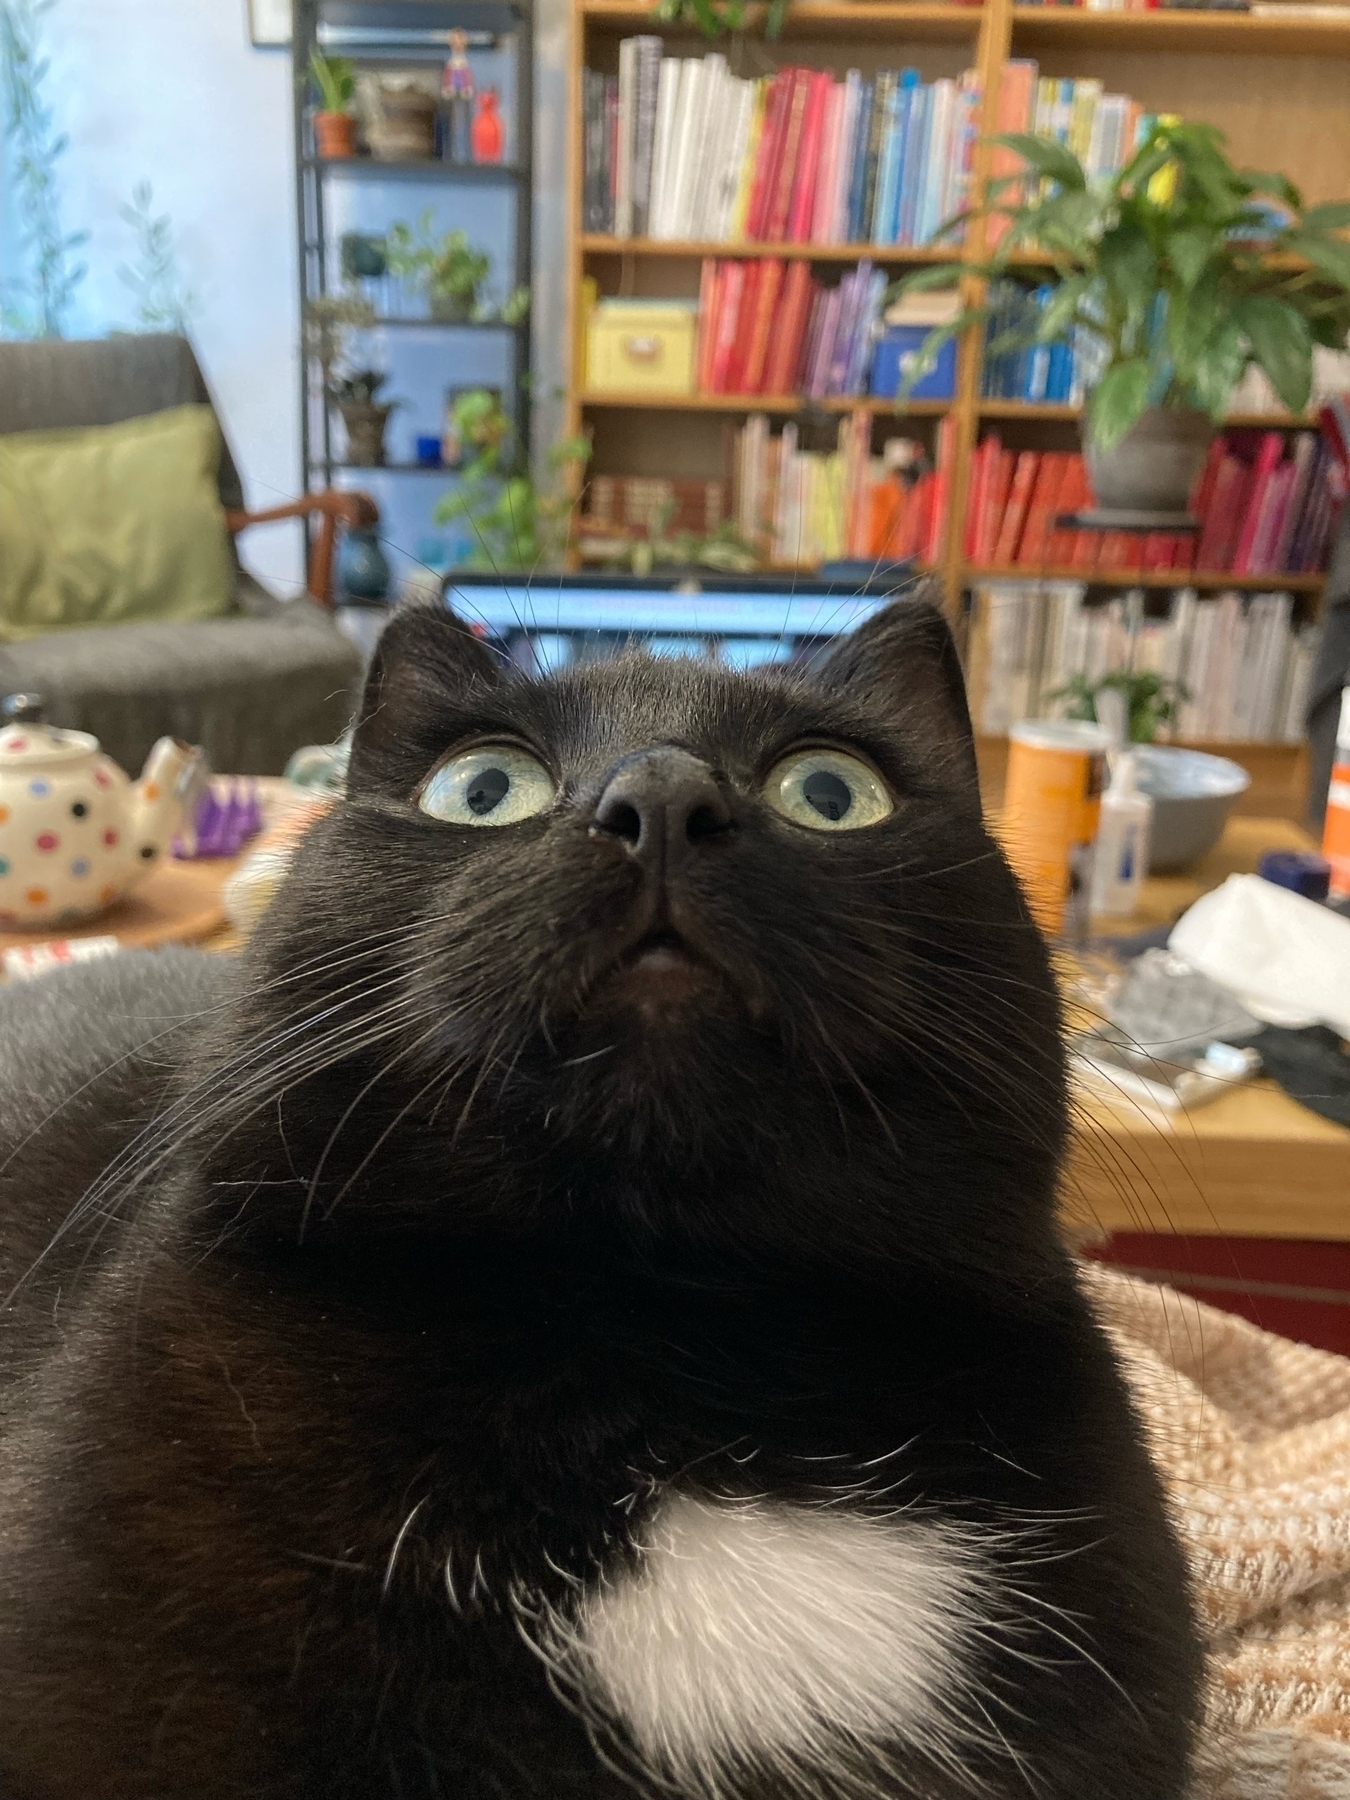 Kolka, a black cat with a white spot, is again making a face and staring up at the ceiling